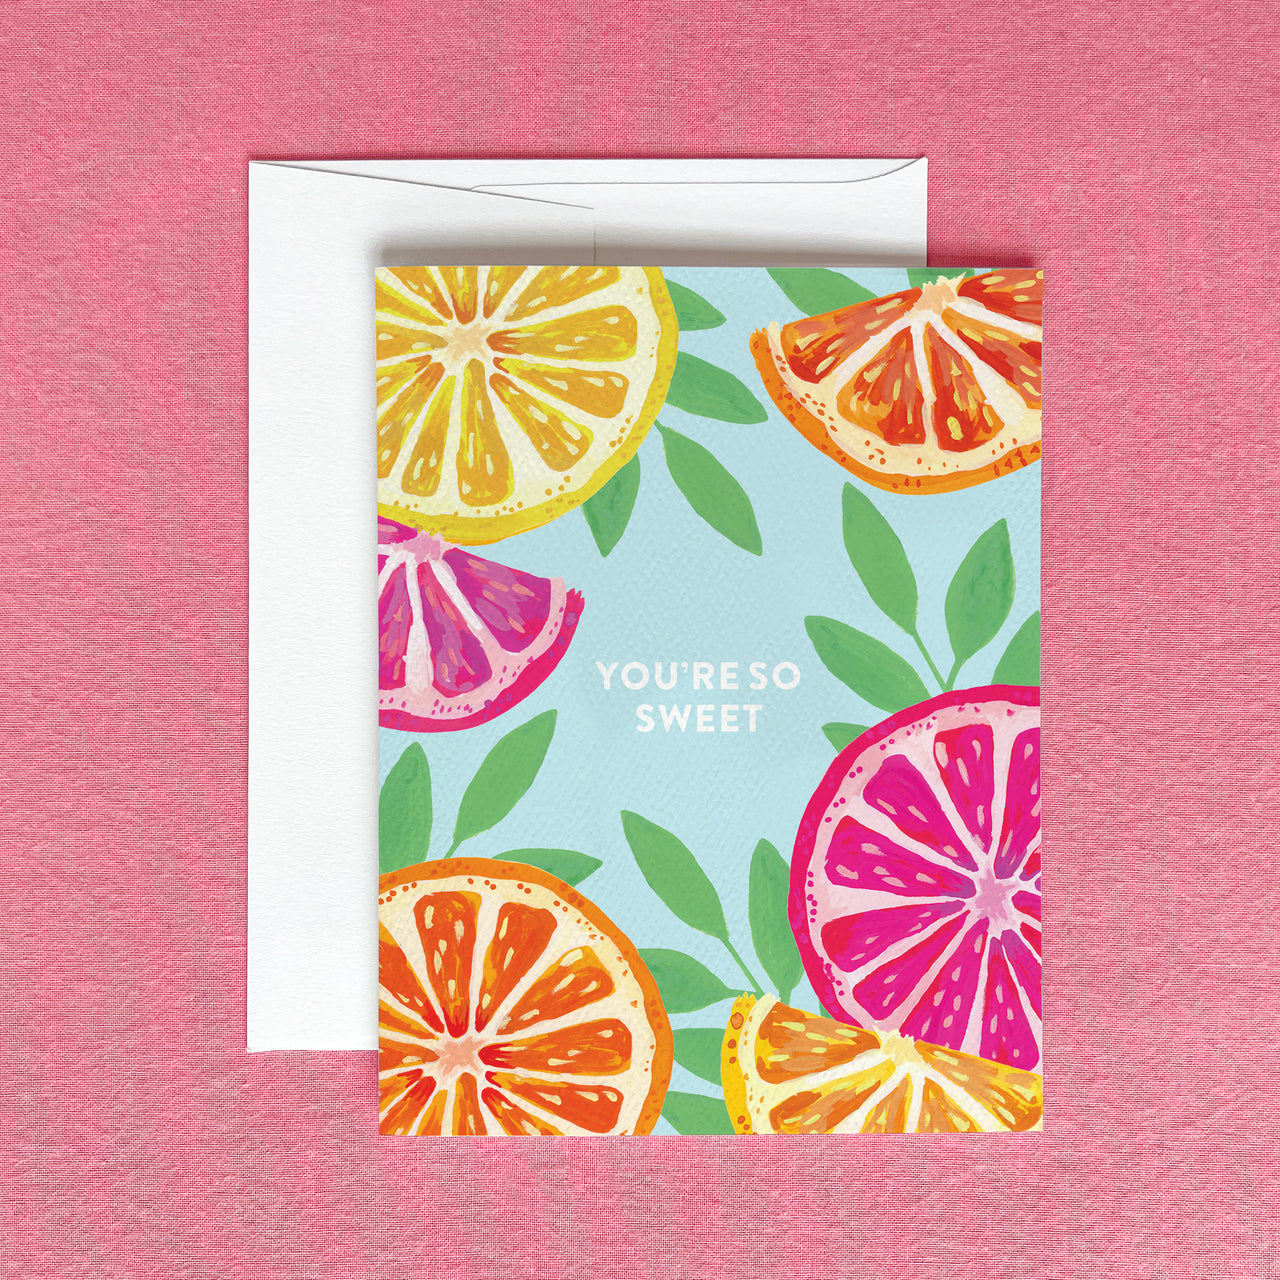 "You're So Sweet" Citrus Greeting Card